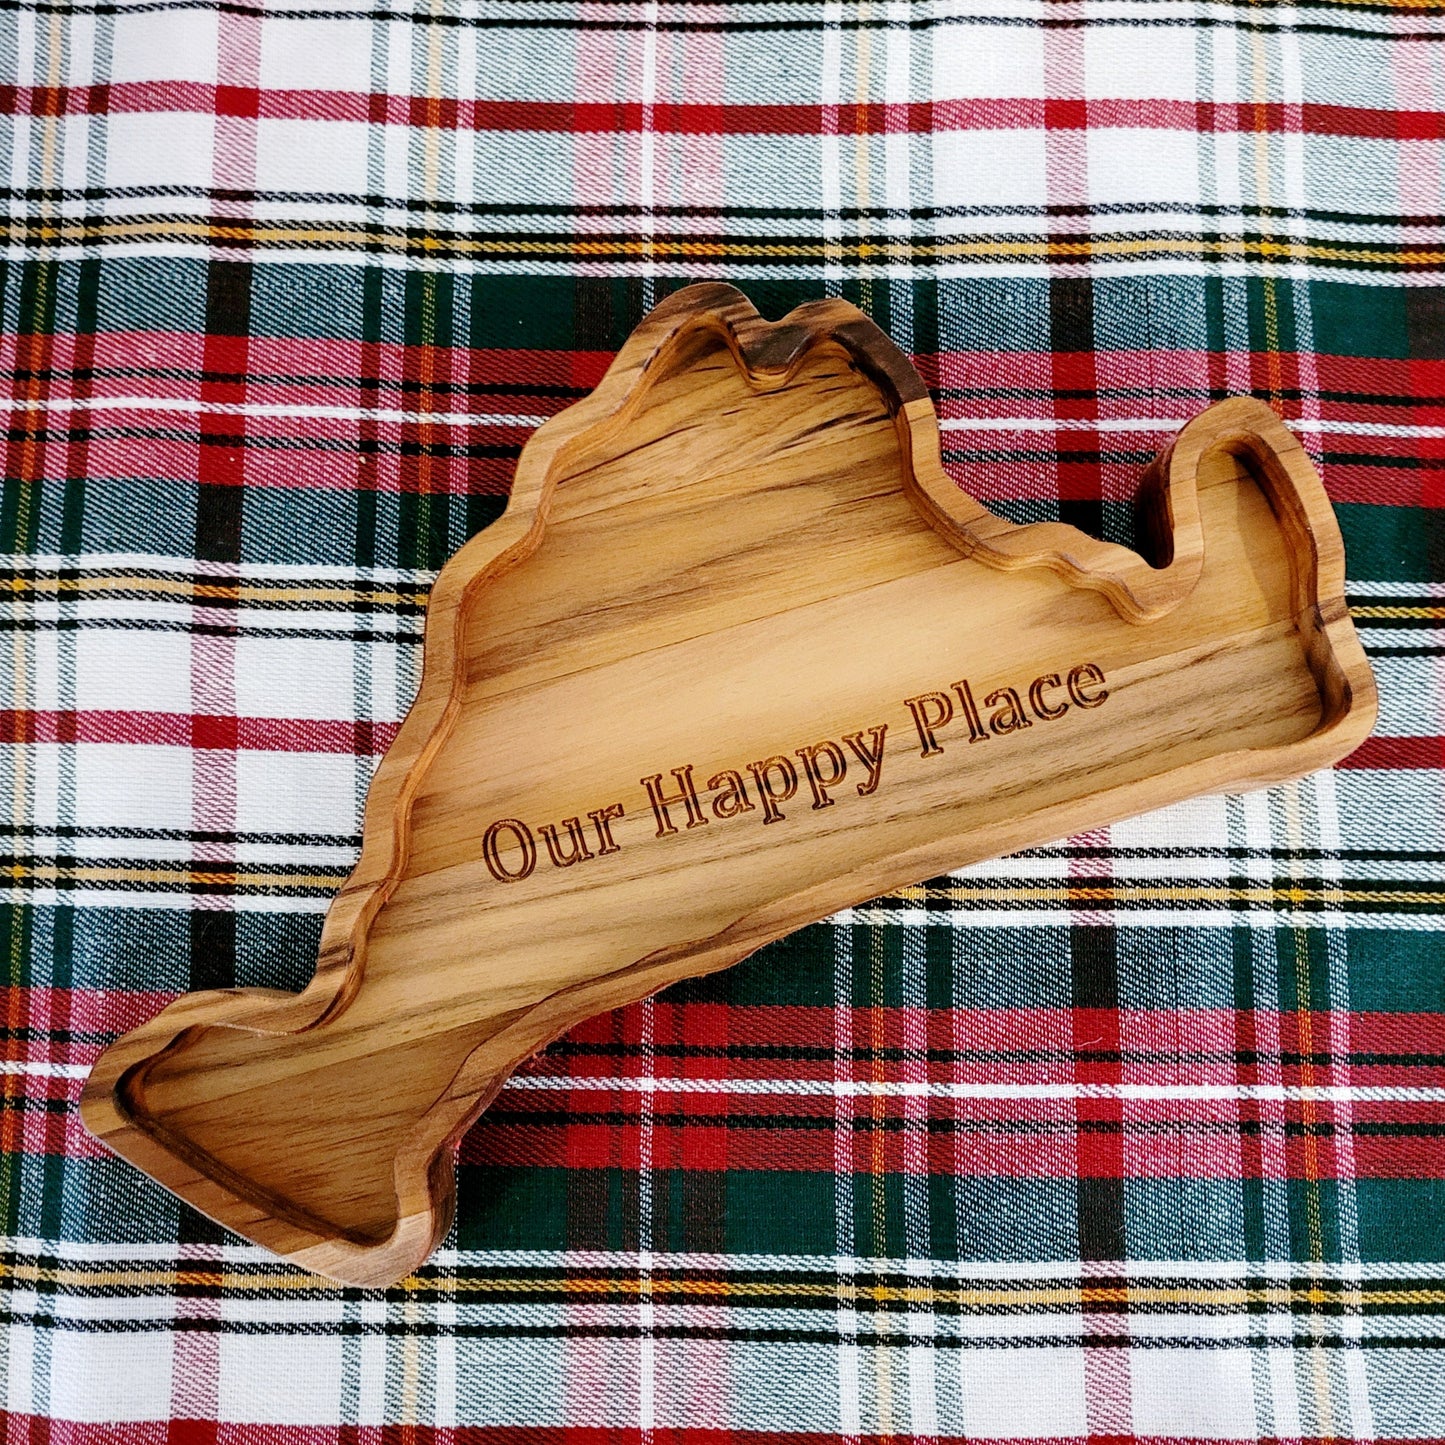 Charcuterie Board Shaped like Martha's Vineyard with engraving Our Happy Place